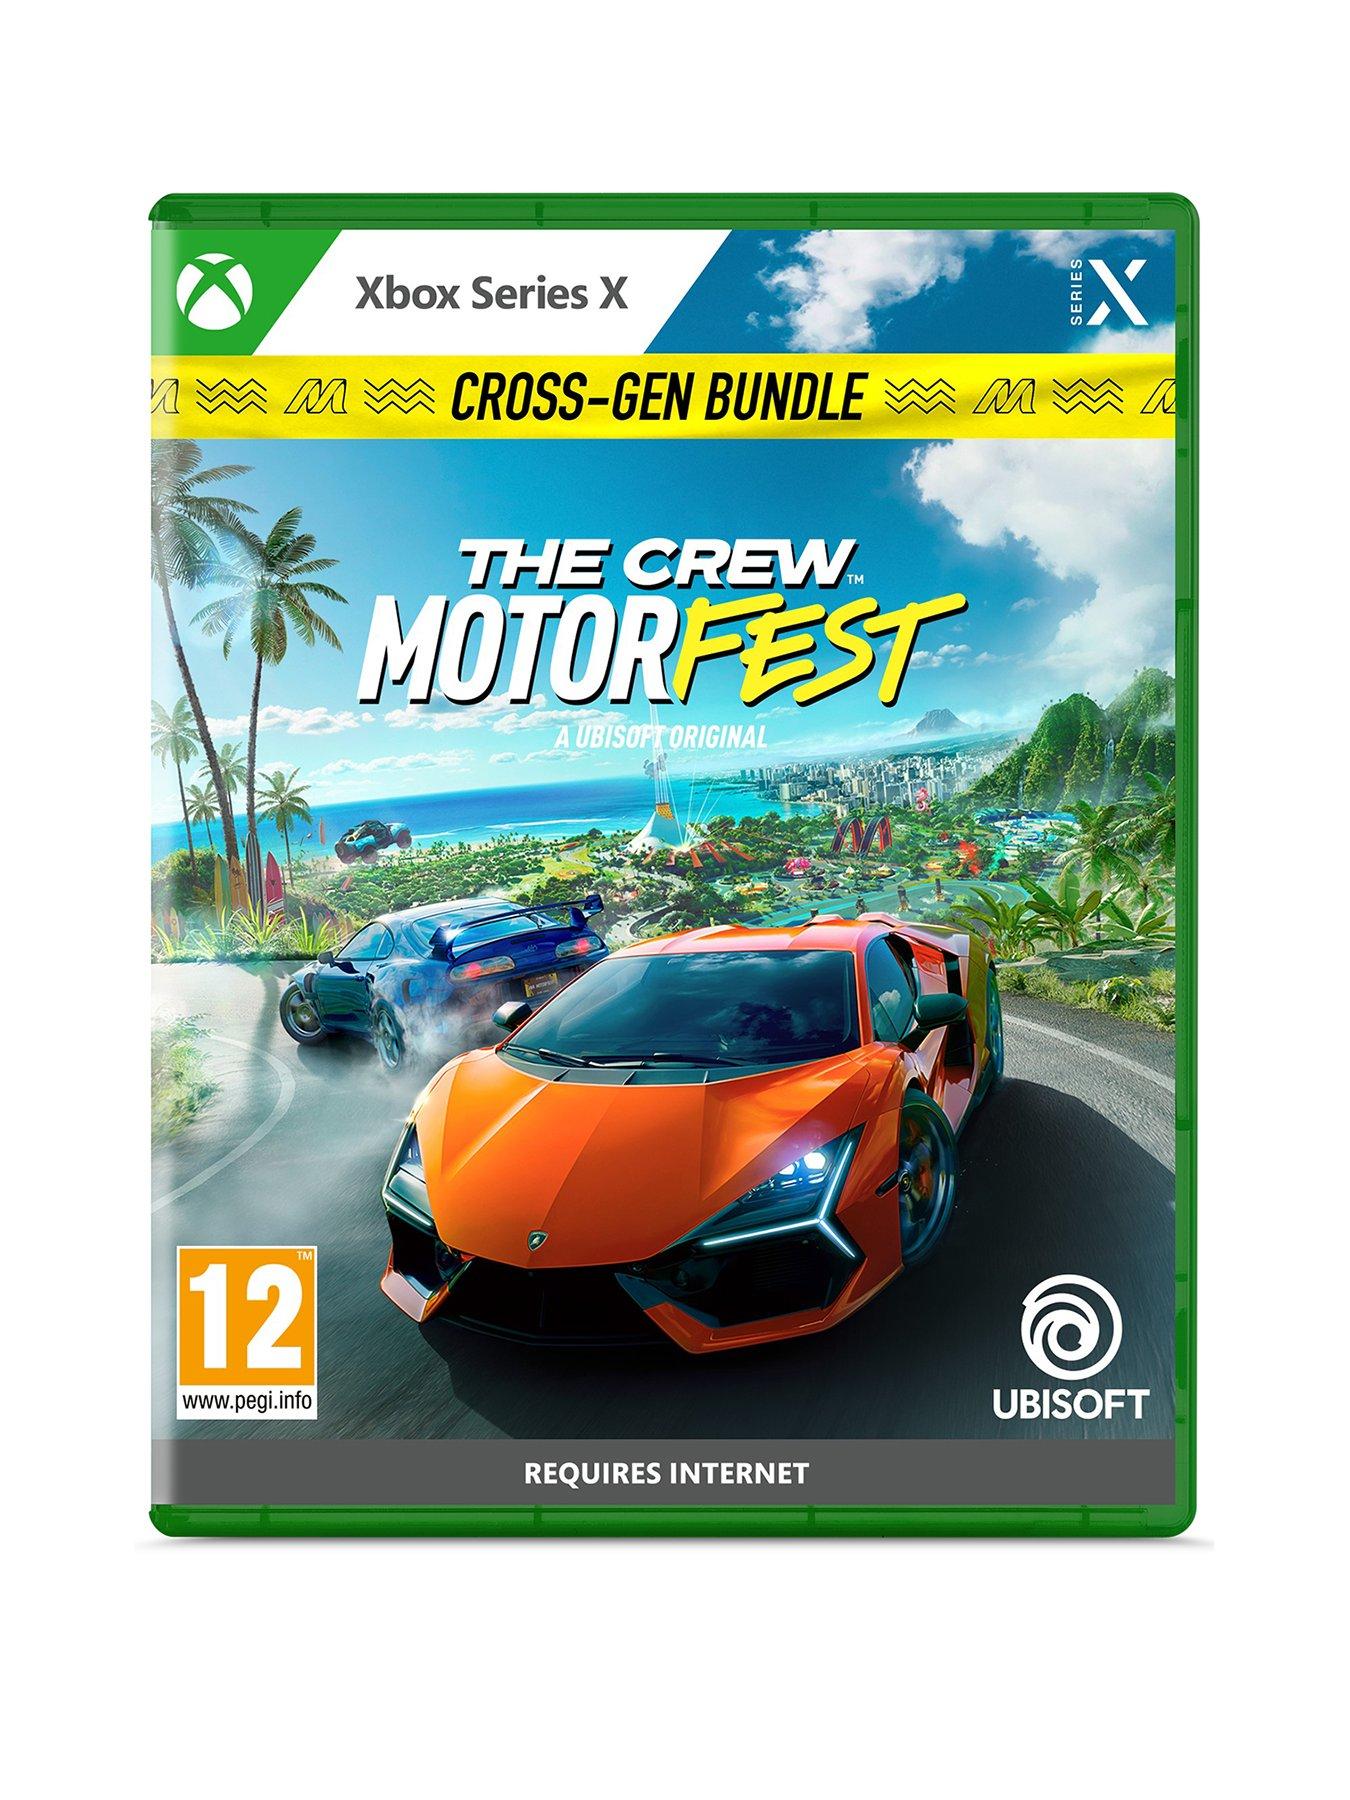 The Crew Motorfest tech review: genuine quality - but Series S is